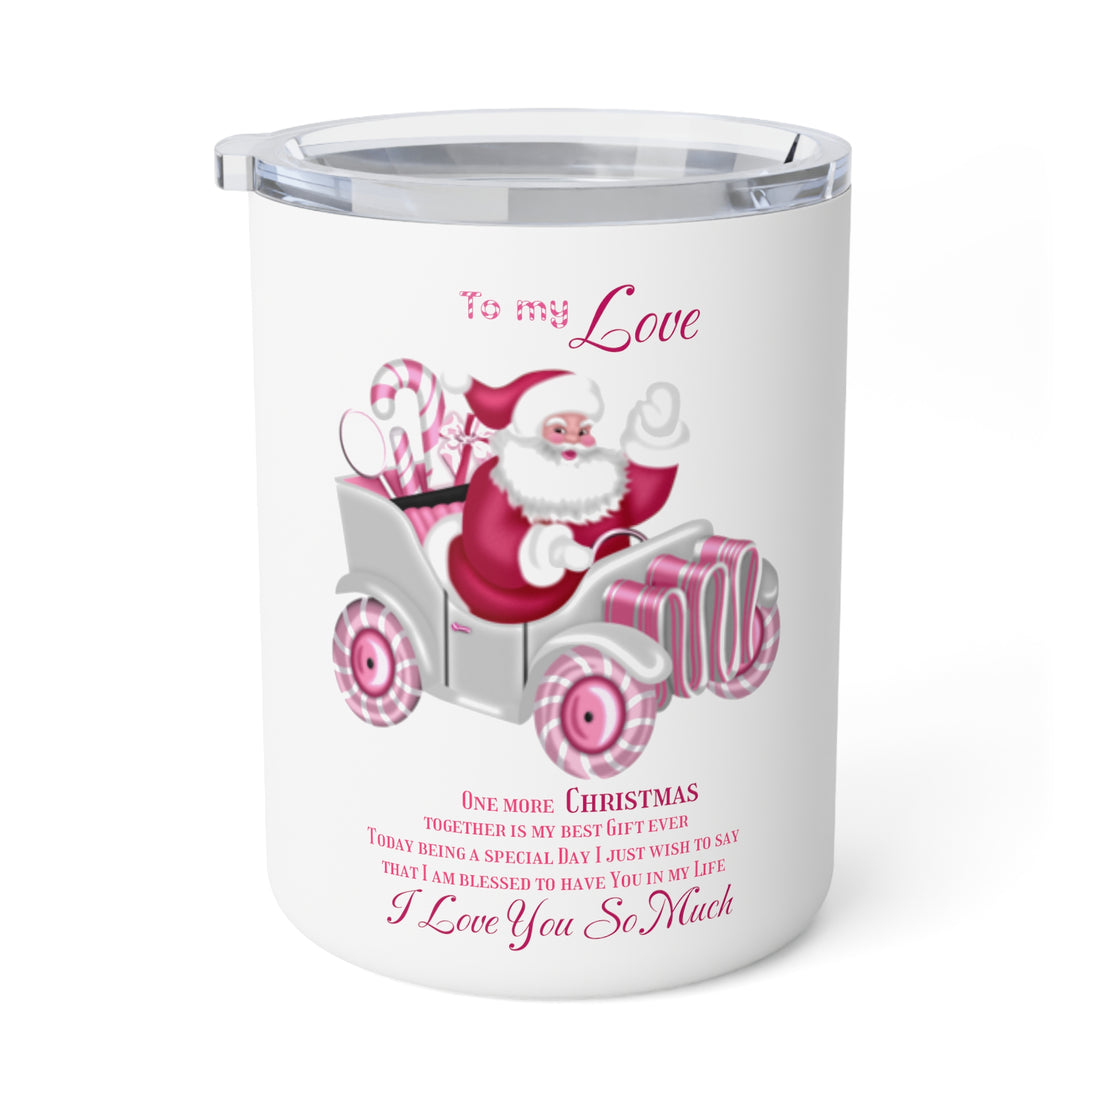 Insulated Coffee Mug To my Love One more Christmas together Home-clothes-jewelry